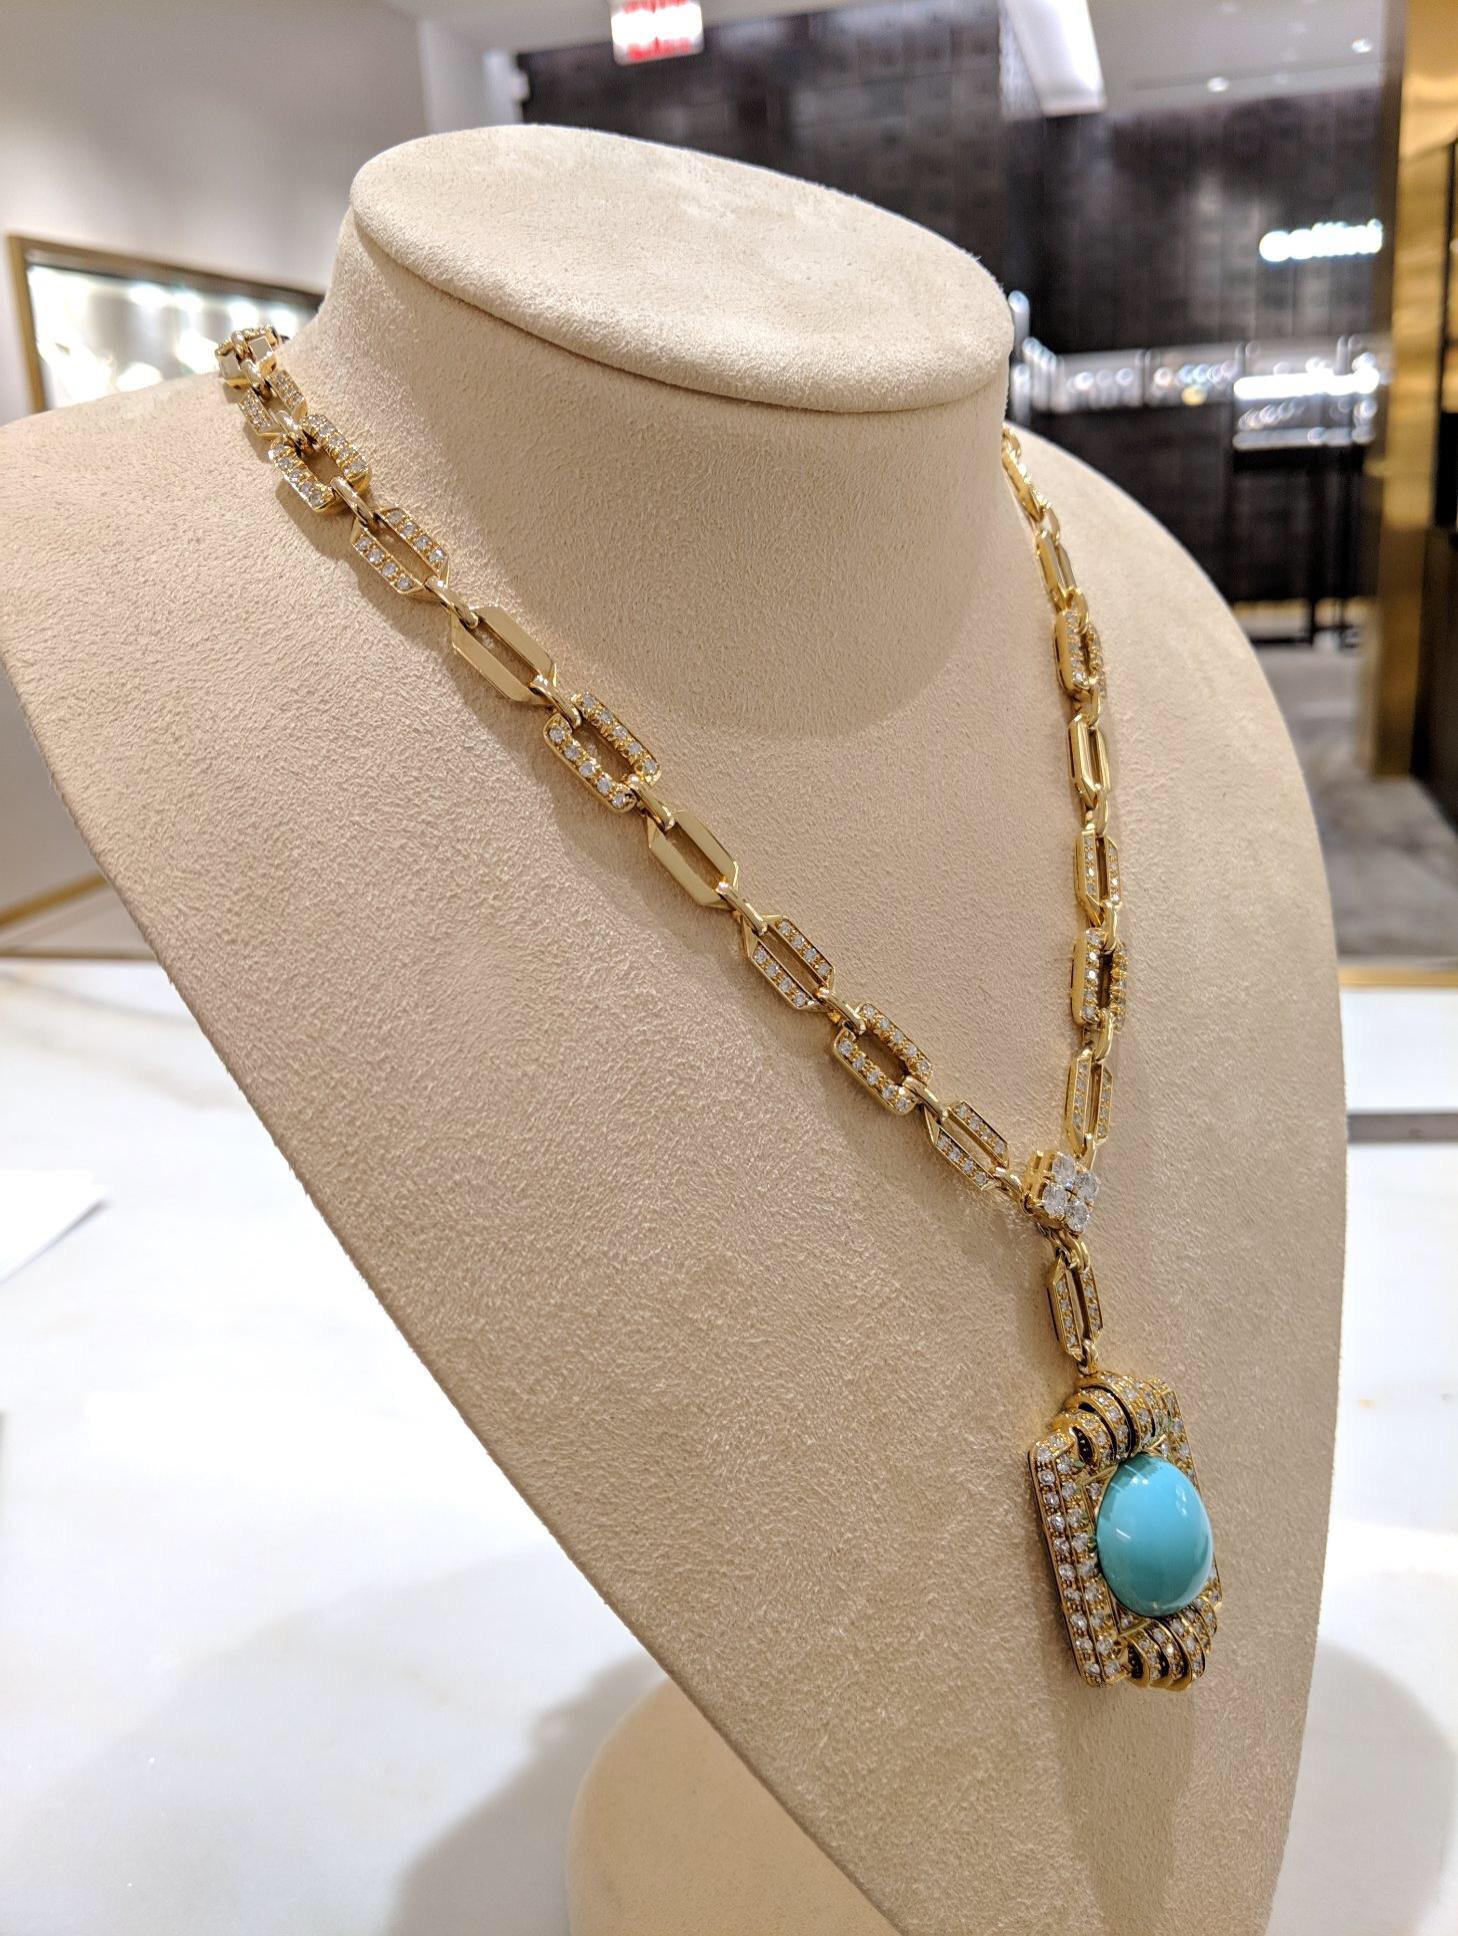 Vintage 18Kt Gold, 9.42ct. Diamond Necklace with a 21.02ct Persian Turquoise 1